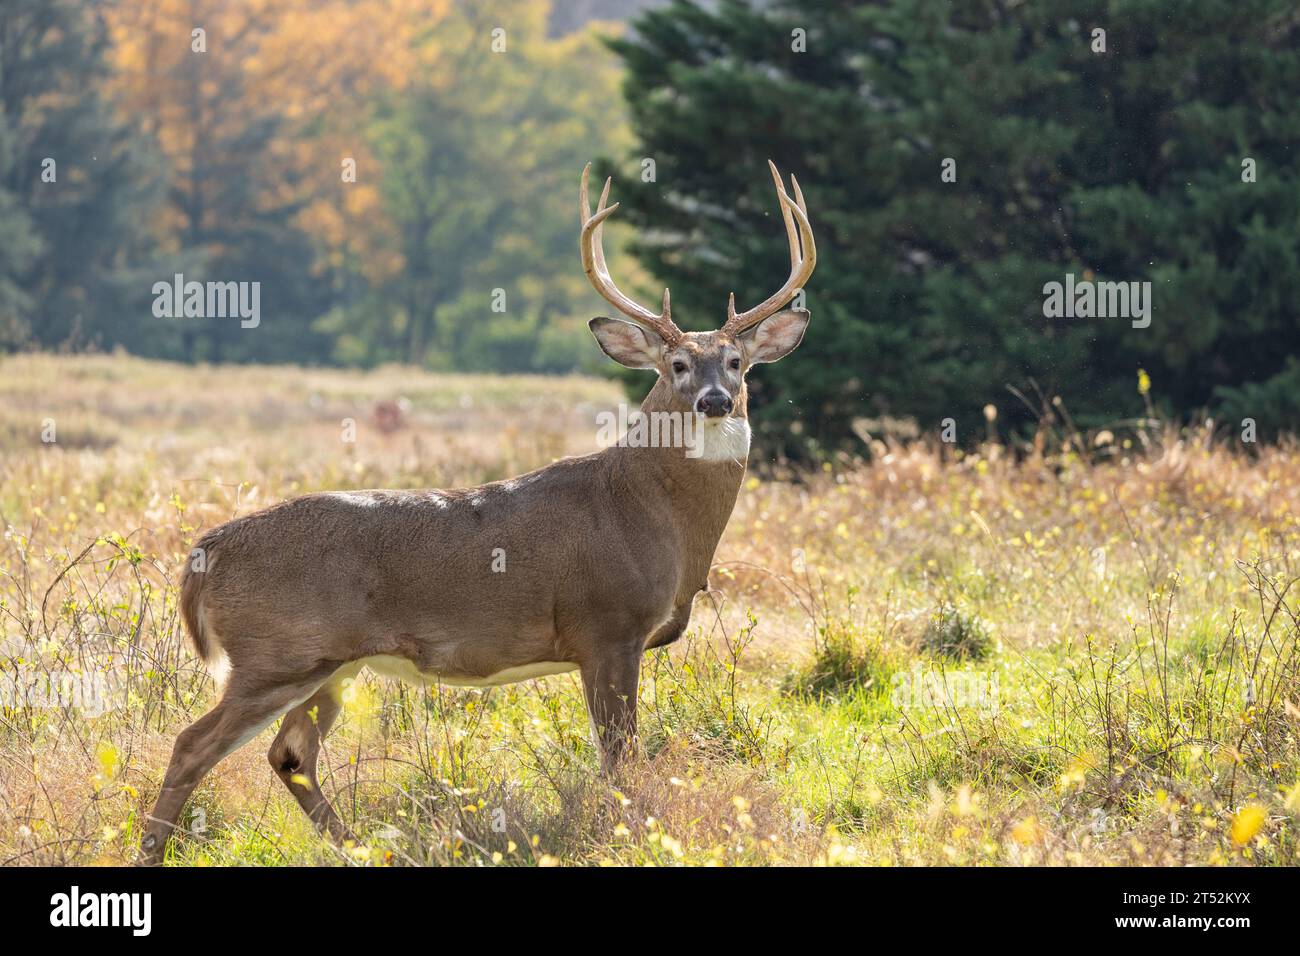 White-tailed deer with antlers with autumn background Stock Photo